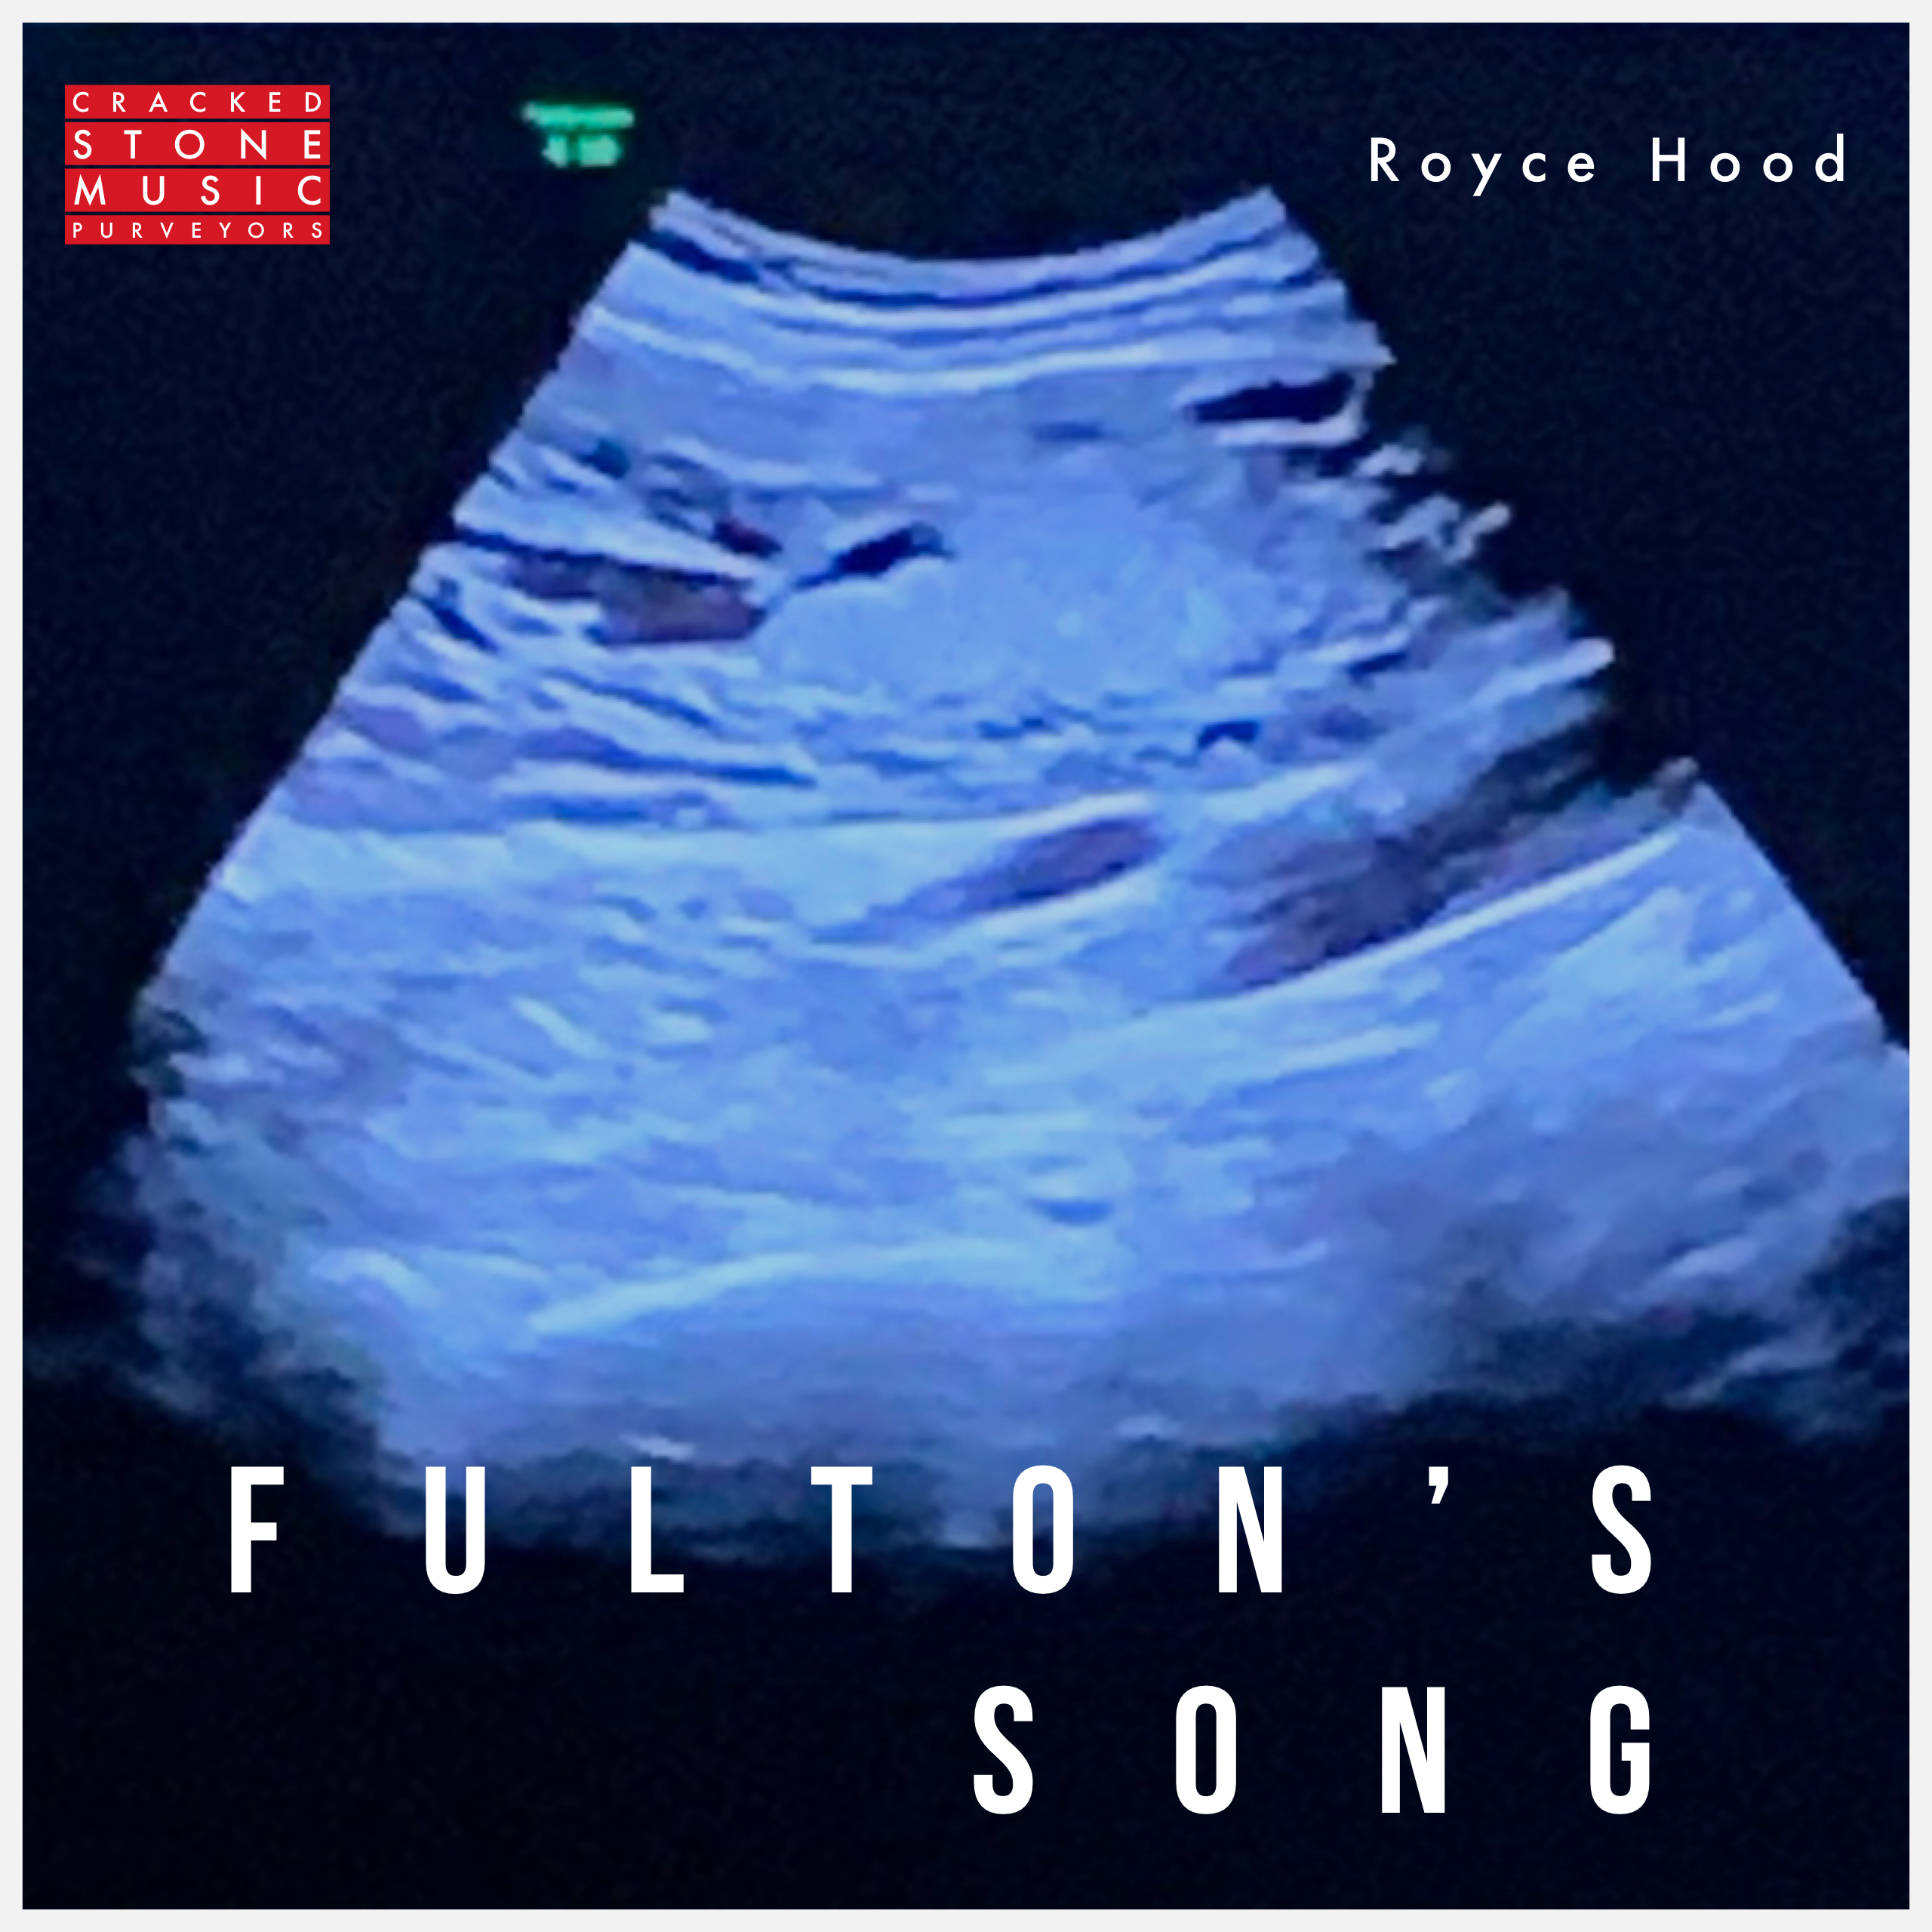 Hear Fulton’s Song Now!